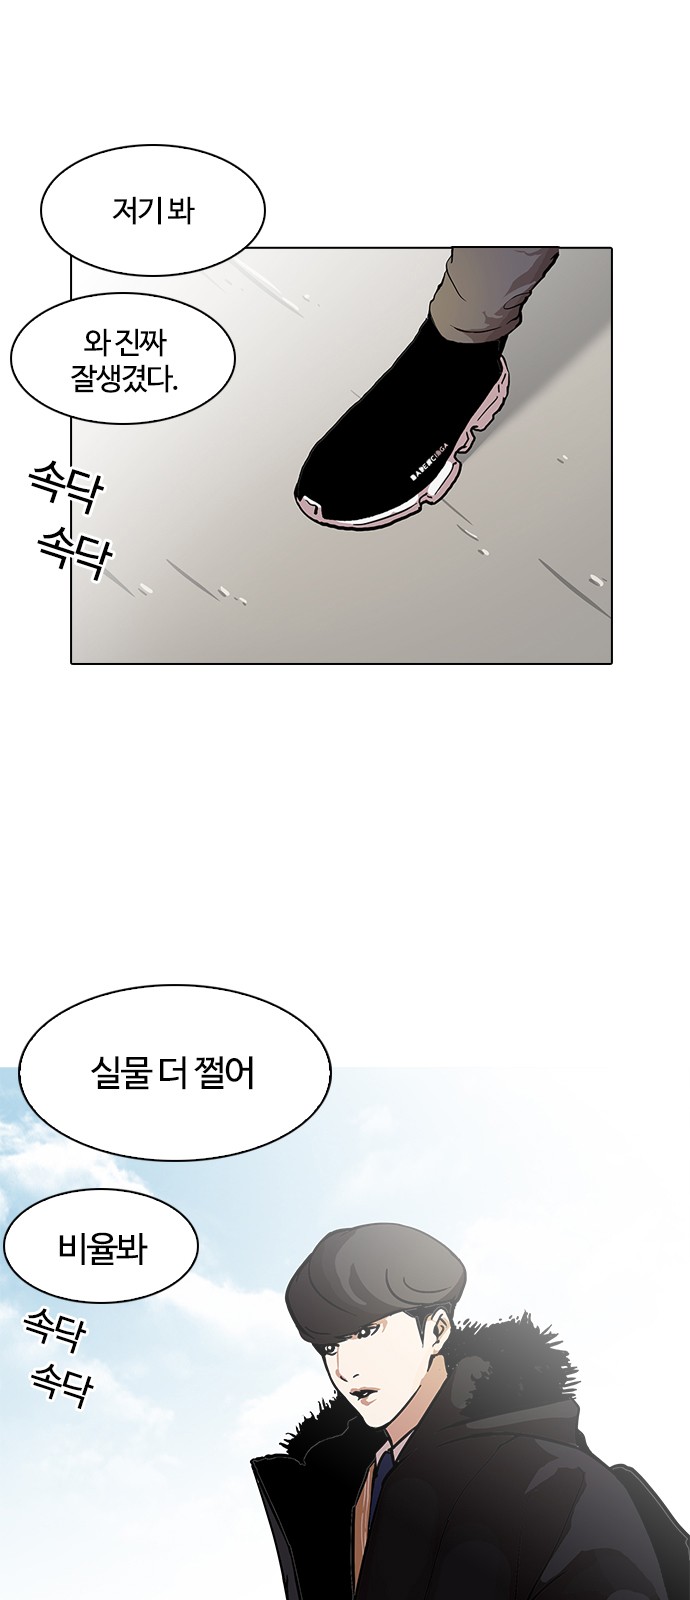 Lookism - Chapter 121 - Page 2